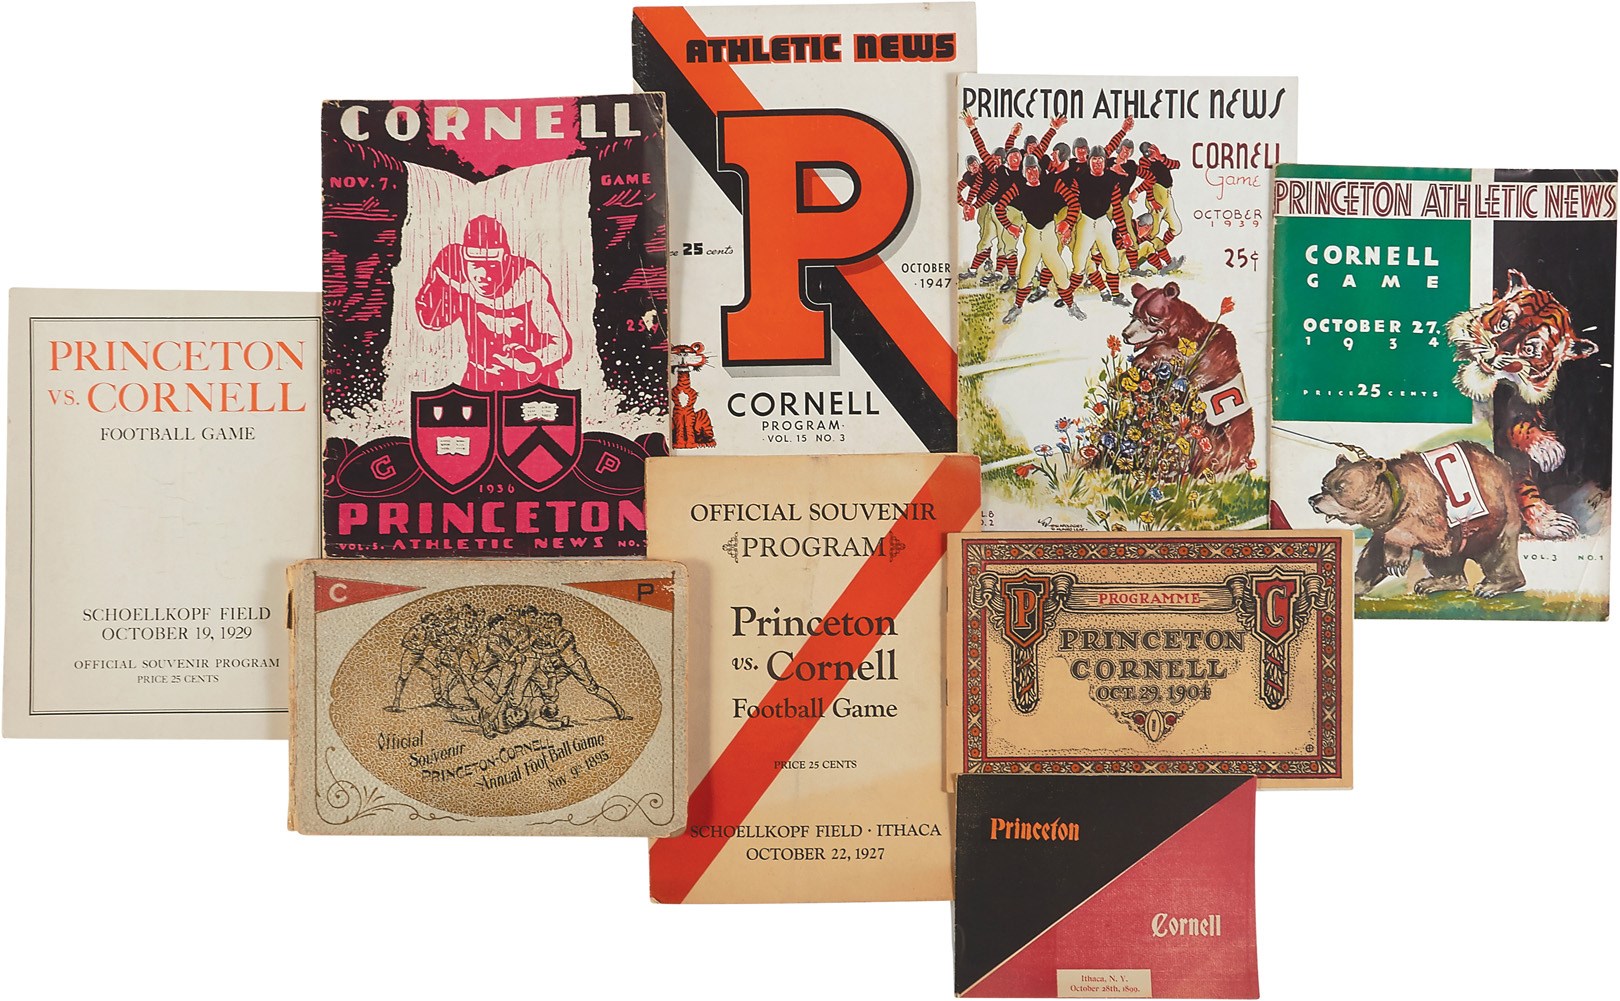 The Ivy League And Collegiate Program Archive - 1895-1960s Princeton vs. Cornell Football Program Collection (55+)